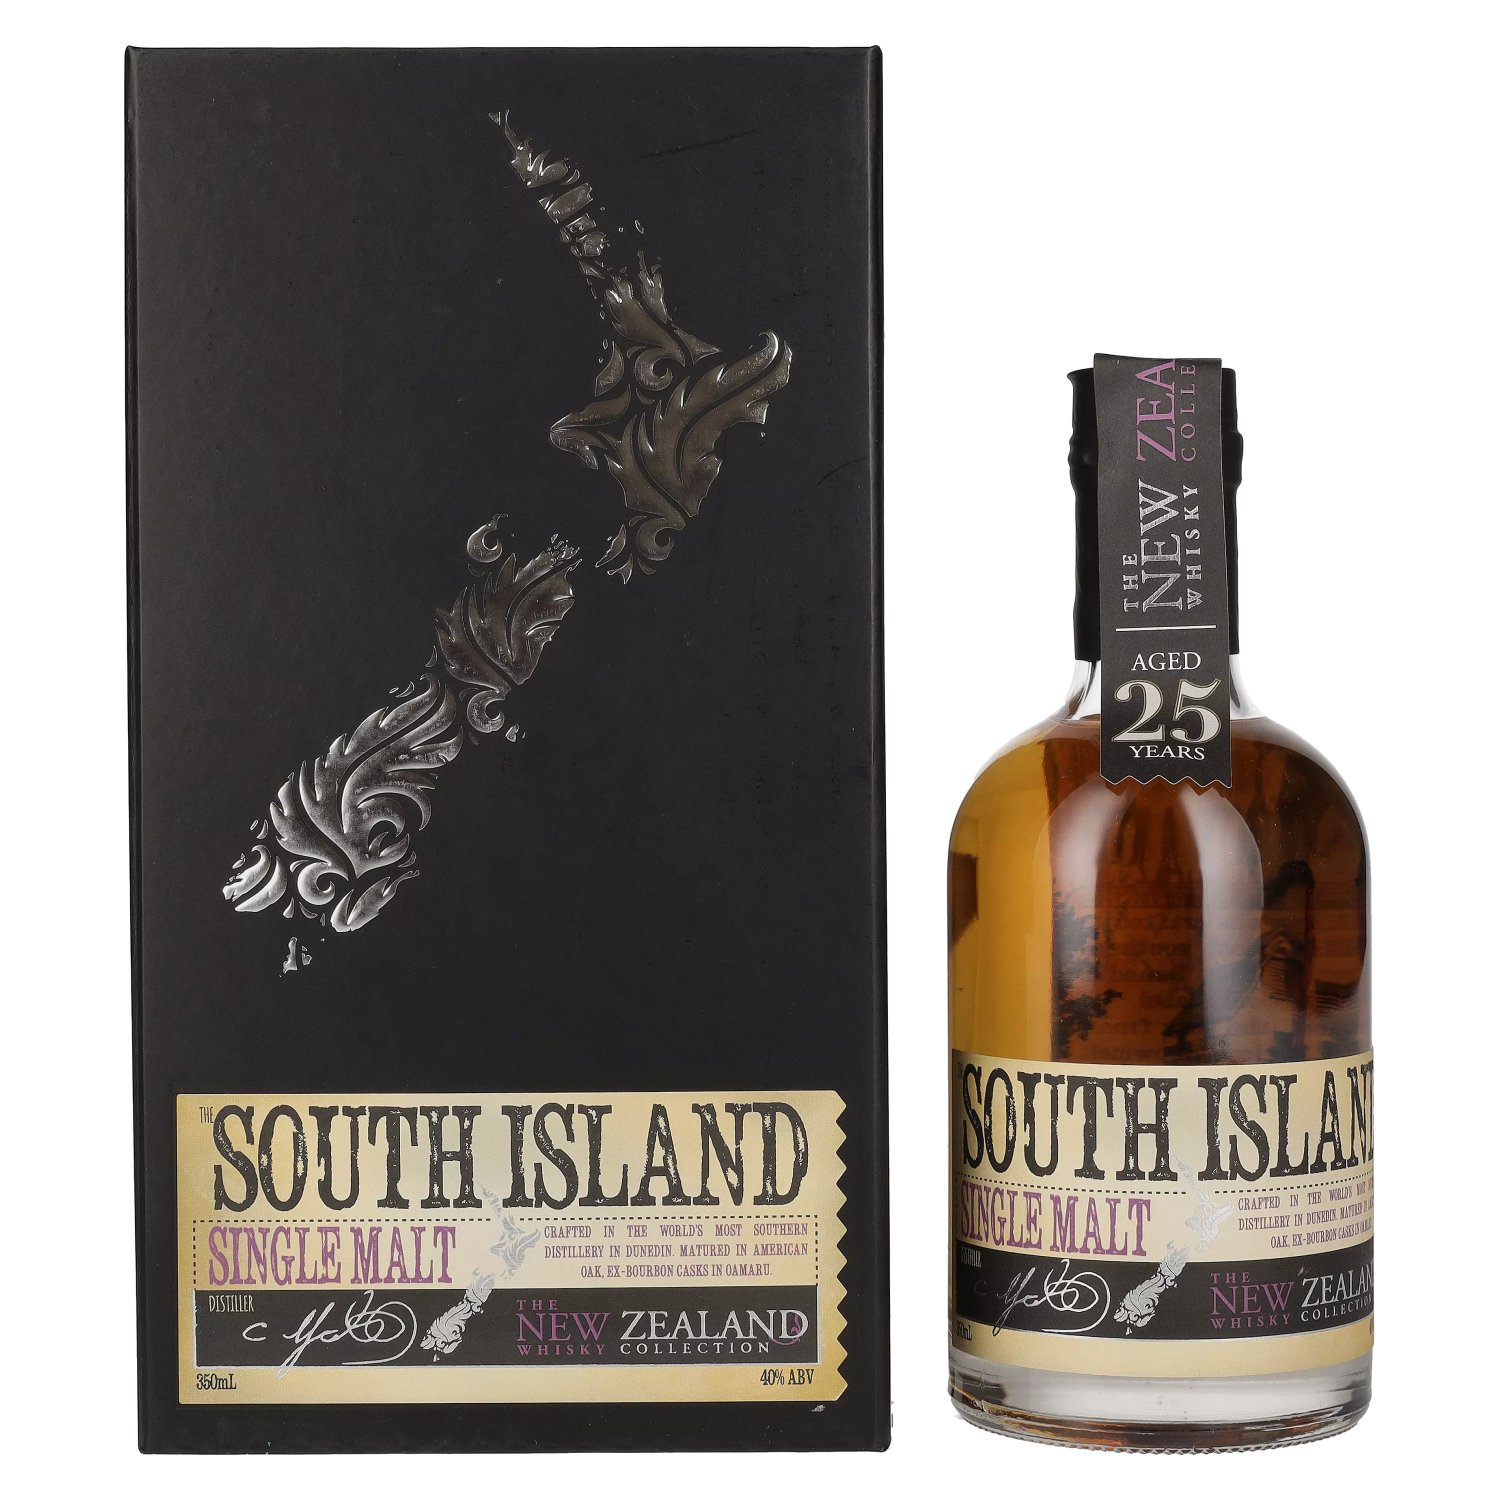 0,35l Years 40% The Geschenkbox Vol. Malt Whisky ISLAND in SOUTH New 25 Zealand Old Single